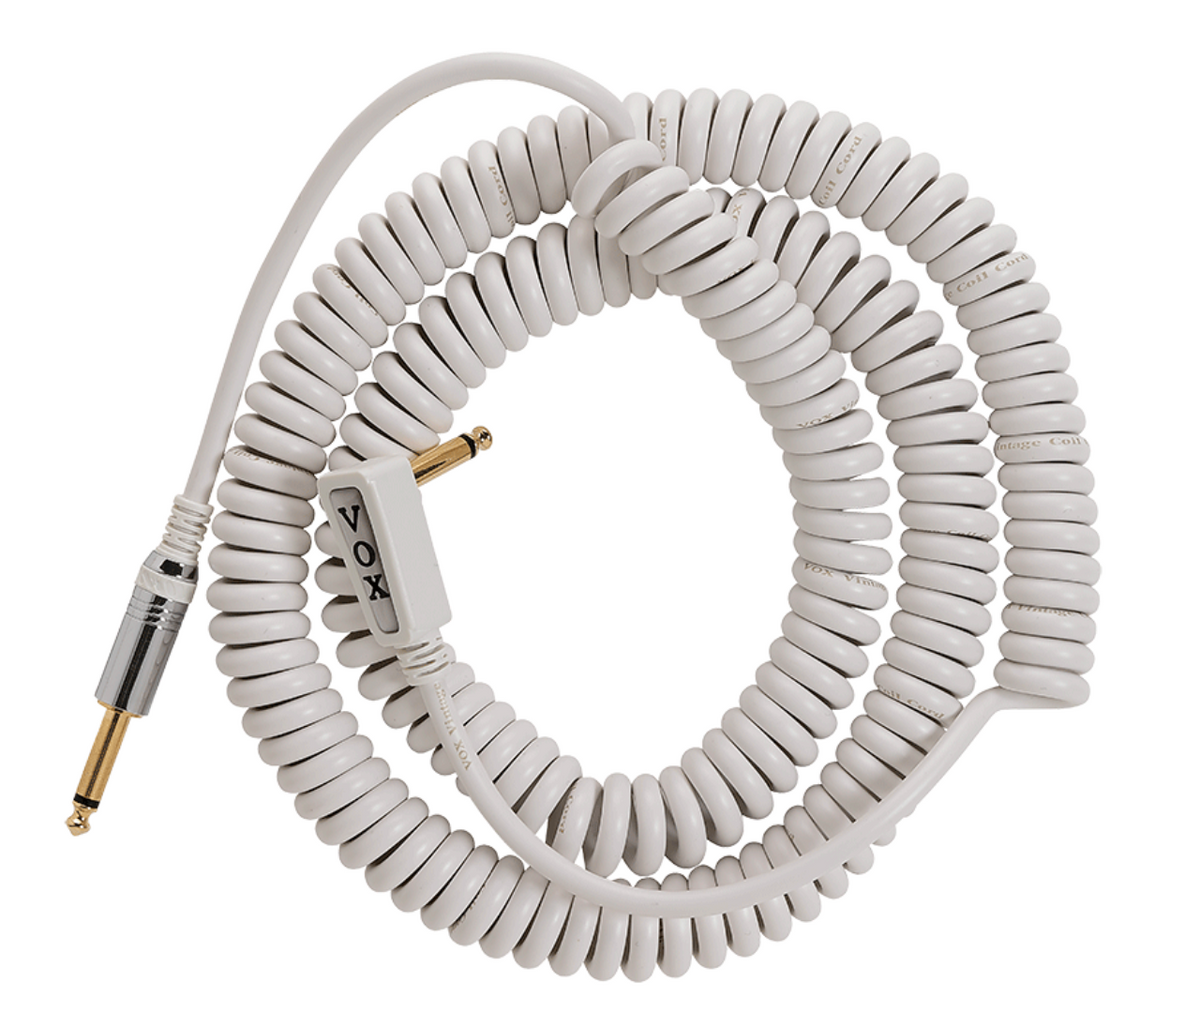 VOX VCC Vintage Coiled Cable White Guitar Cable Cord VCC90WH, 29.5 Feet, Maximum Noise Isolation, Multi-gauge 99.99% Purity Copper Cable